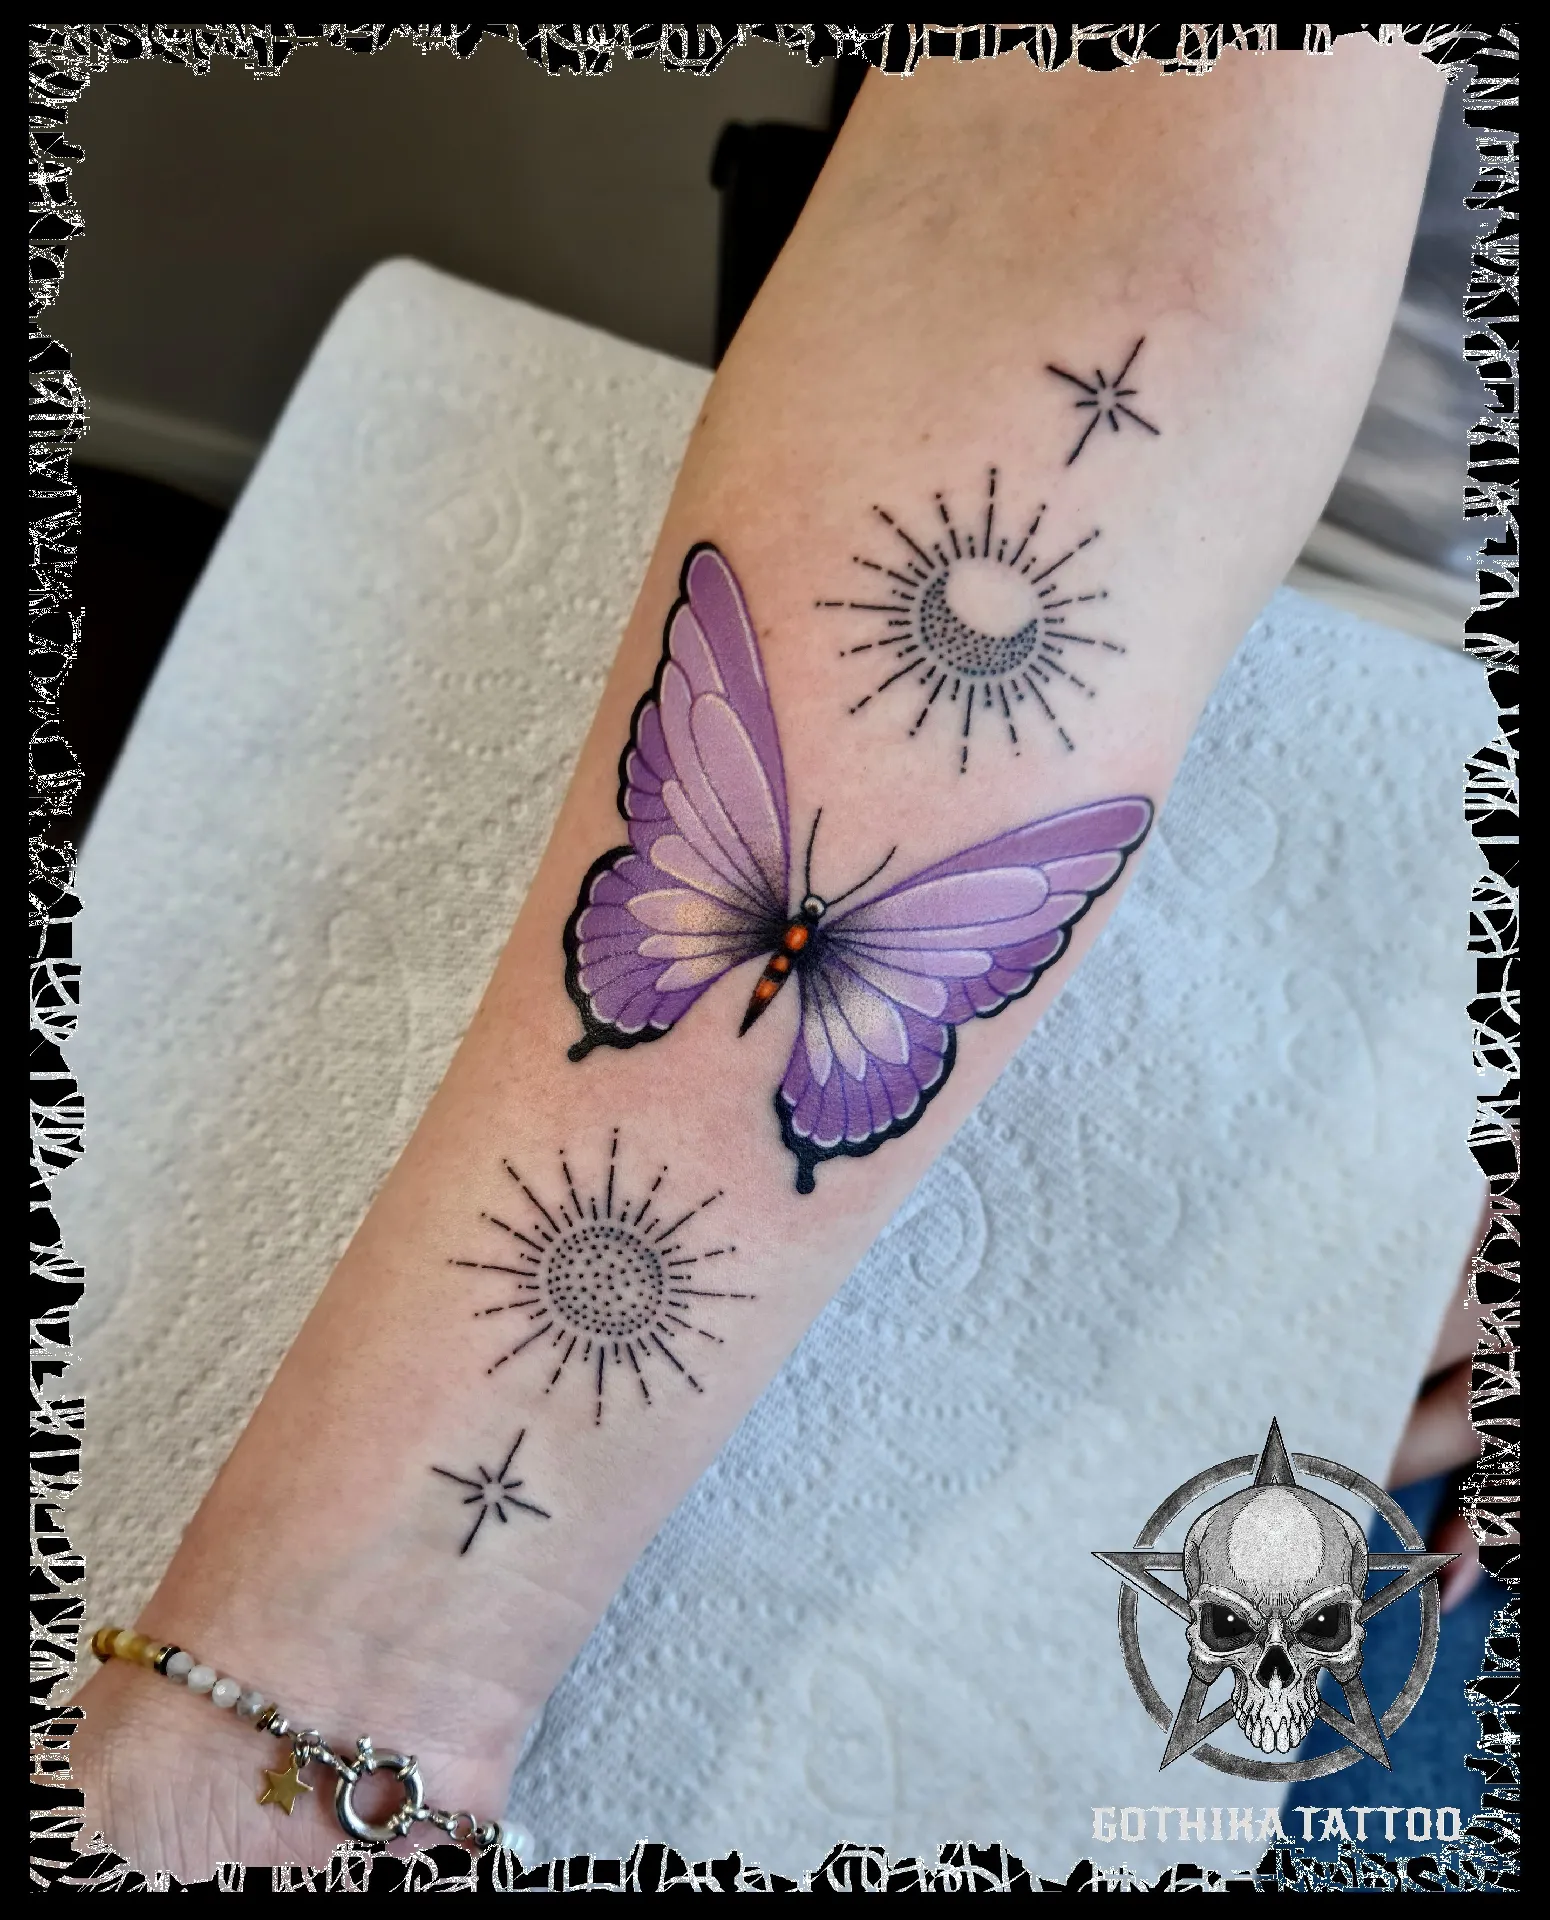 Purple Butterfly Tattoo Meaning and Designs Symbolism, Ideas, and Inspiration